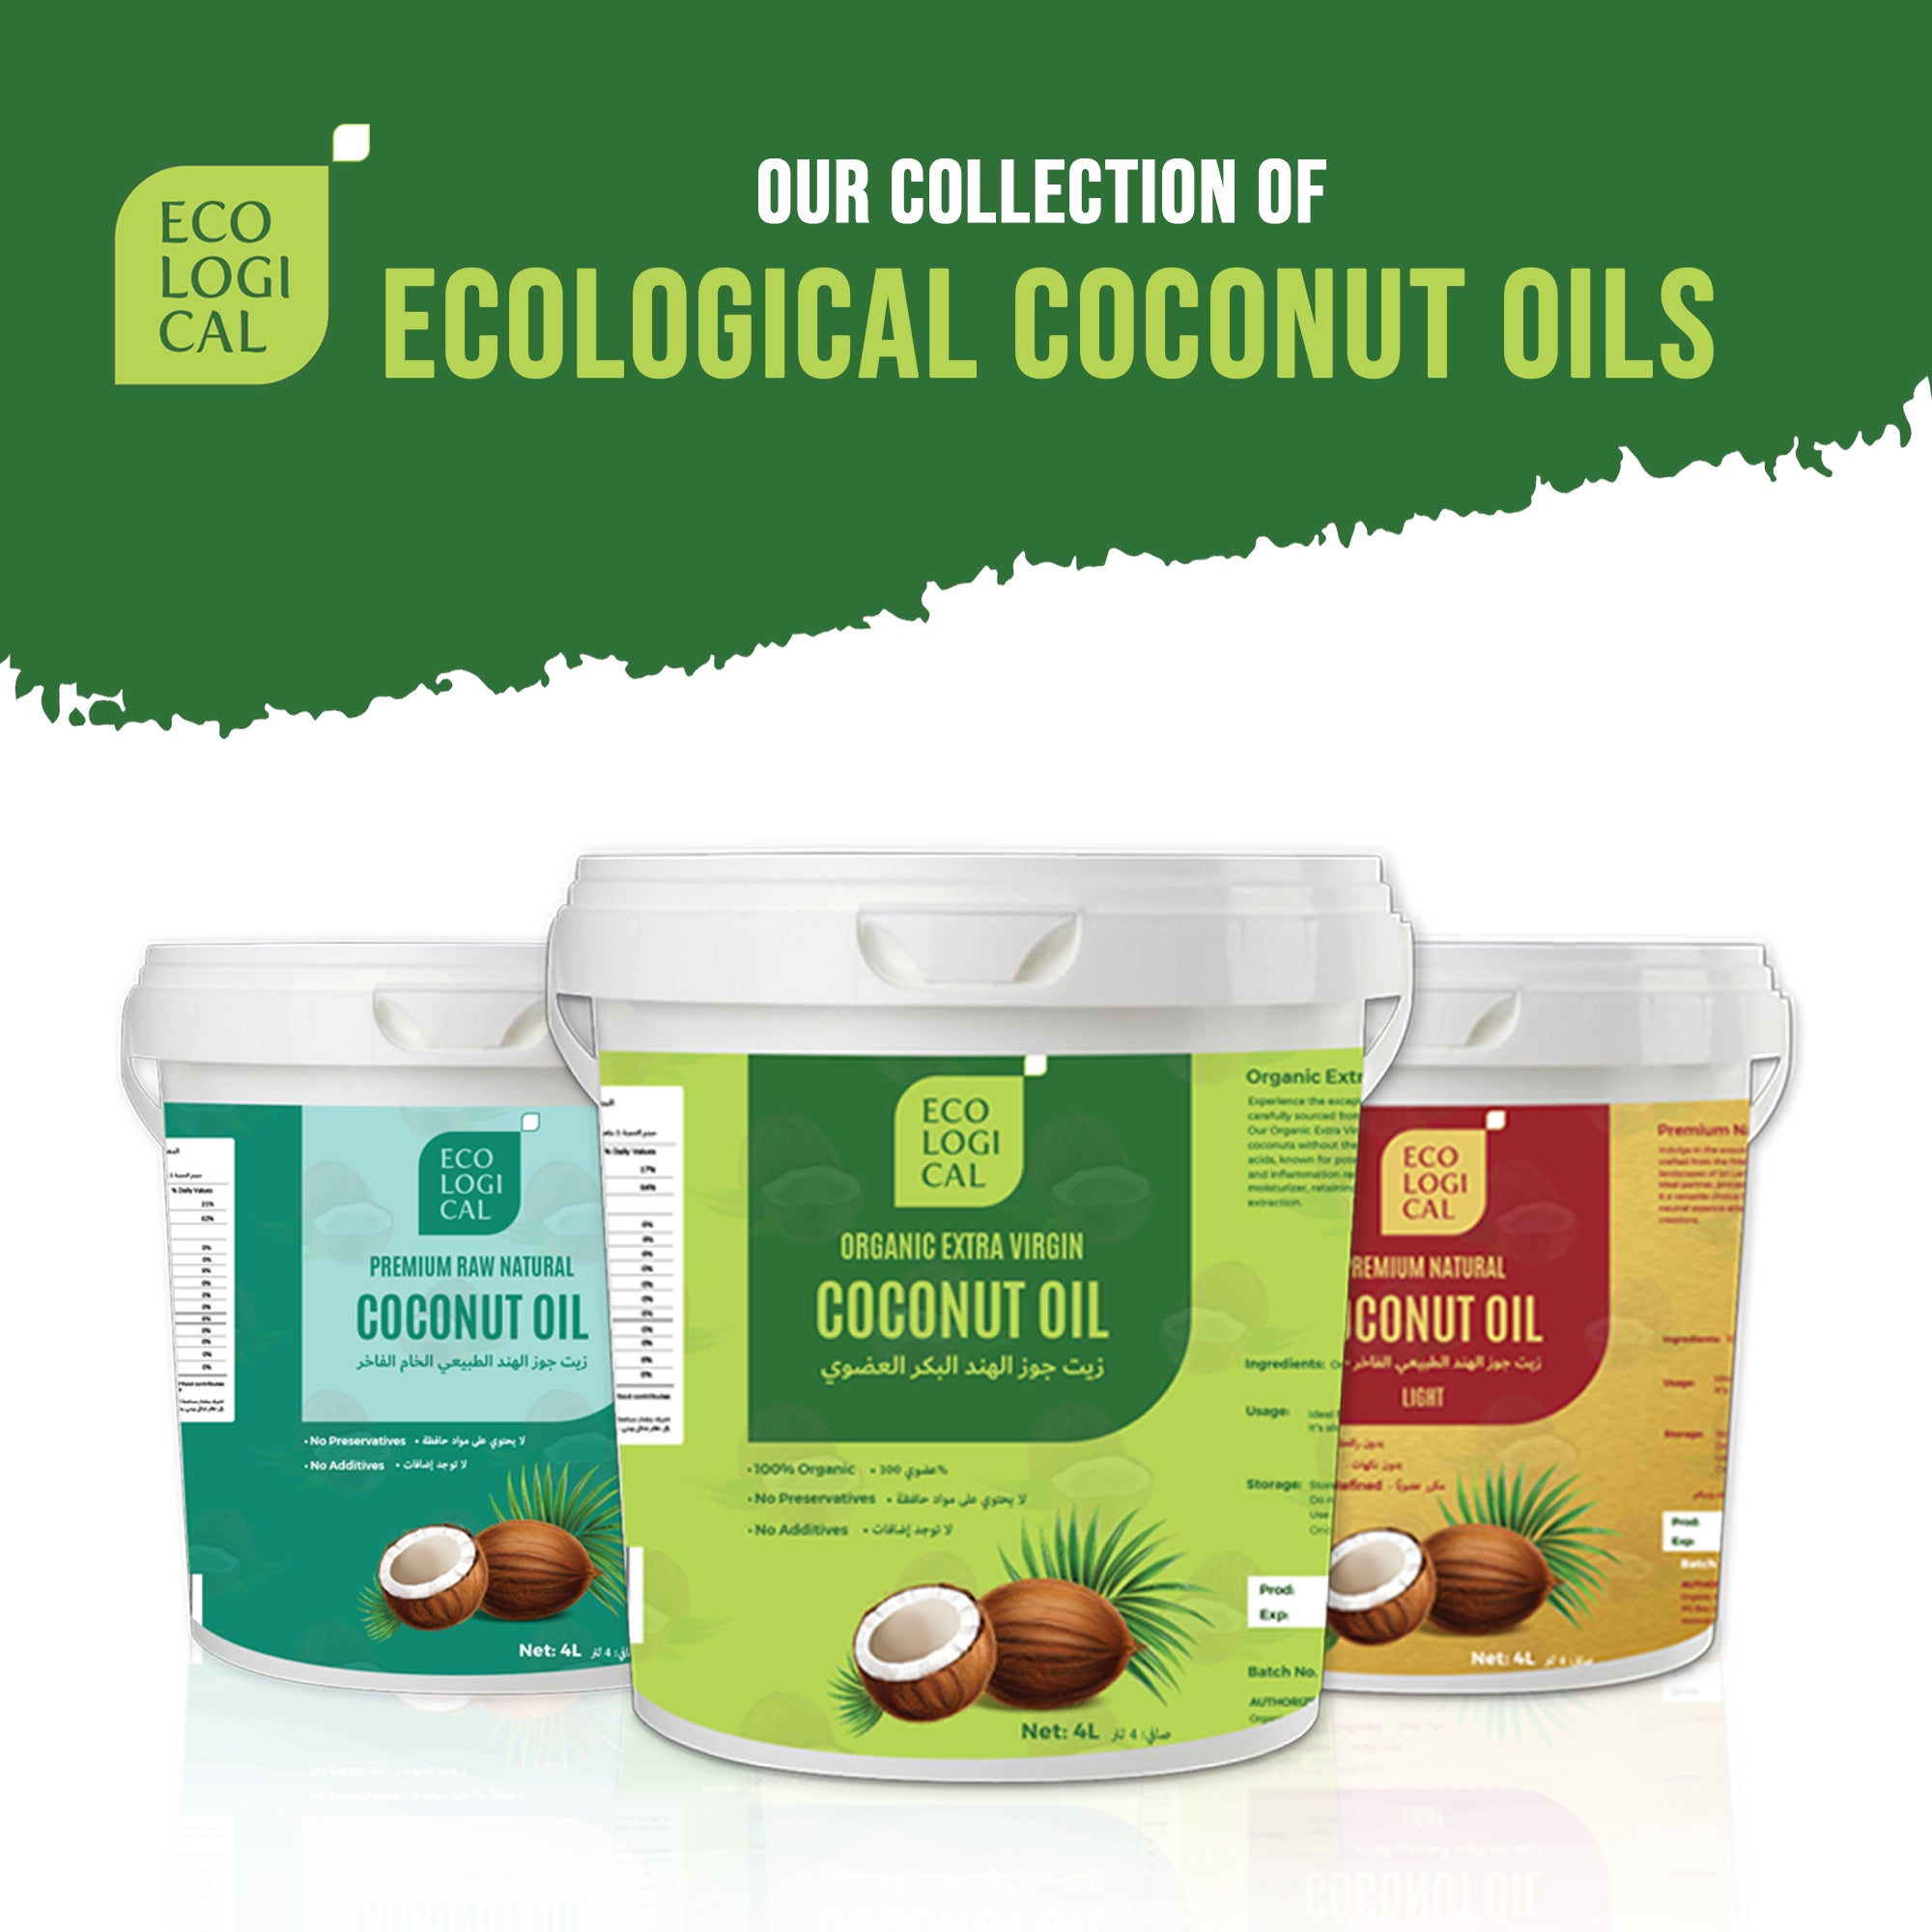 ECOLOGICAL Organic Extra Virgin Coconut Oil 4L - Cold Pressed, Unrefined and Pure Cooking Oil for a Healthy Living